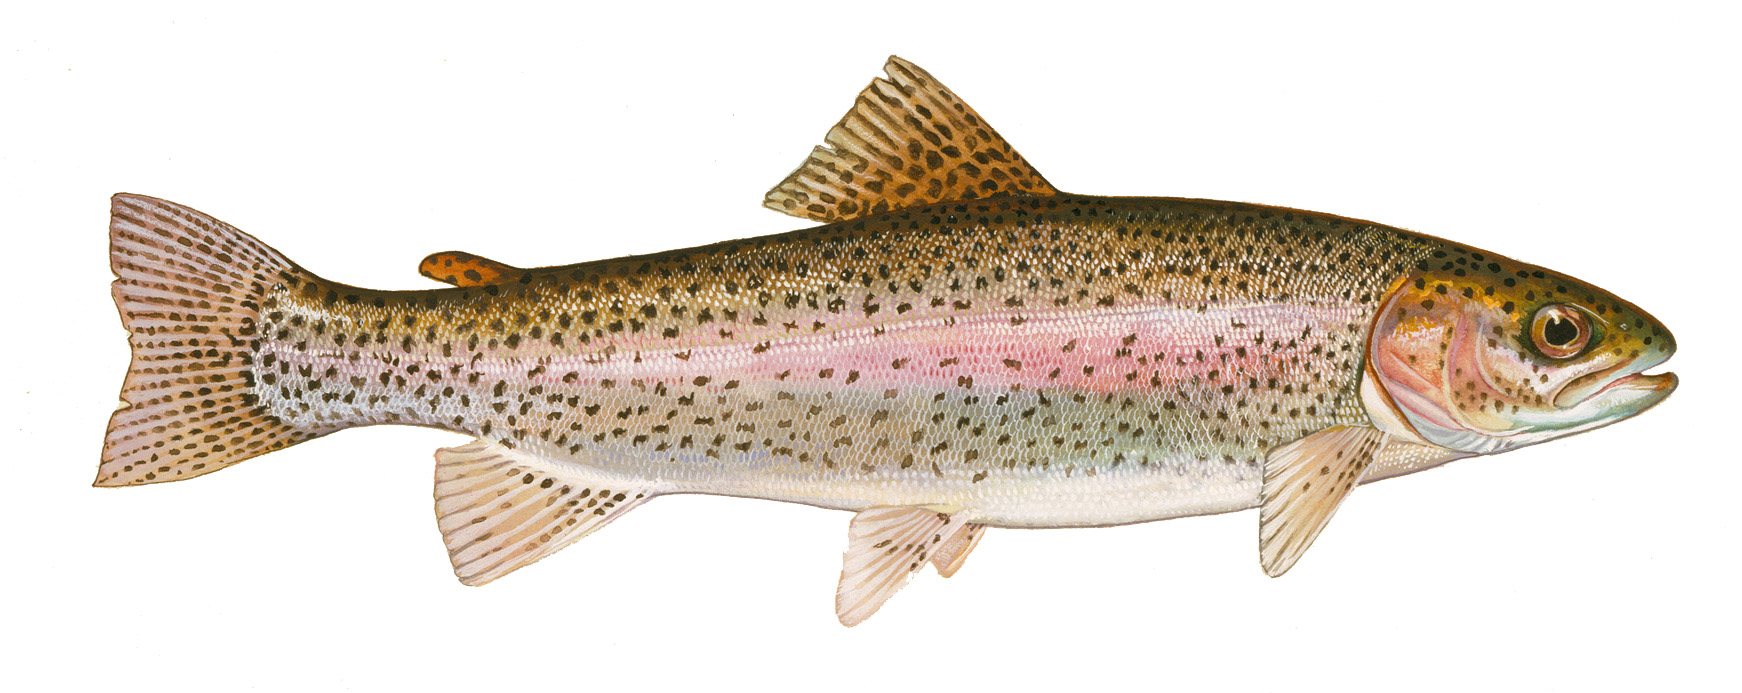 interactive image: photo of rainbow trout; click for larger photo